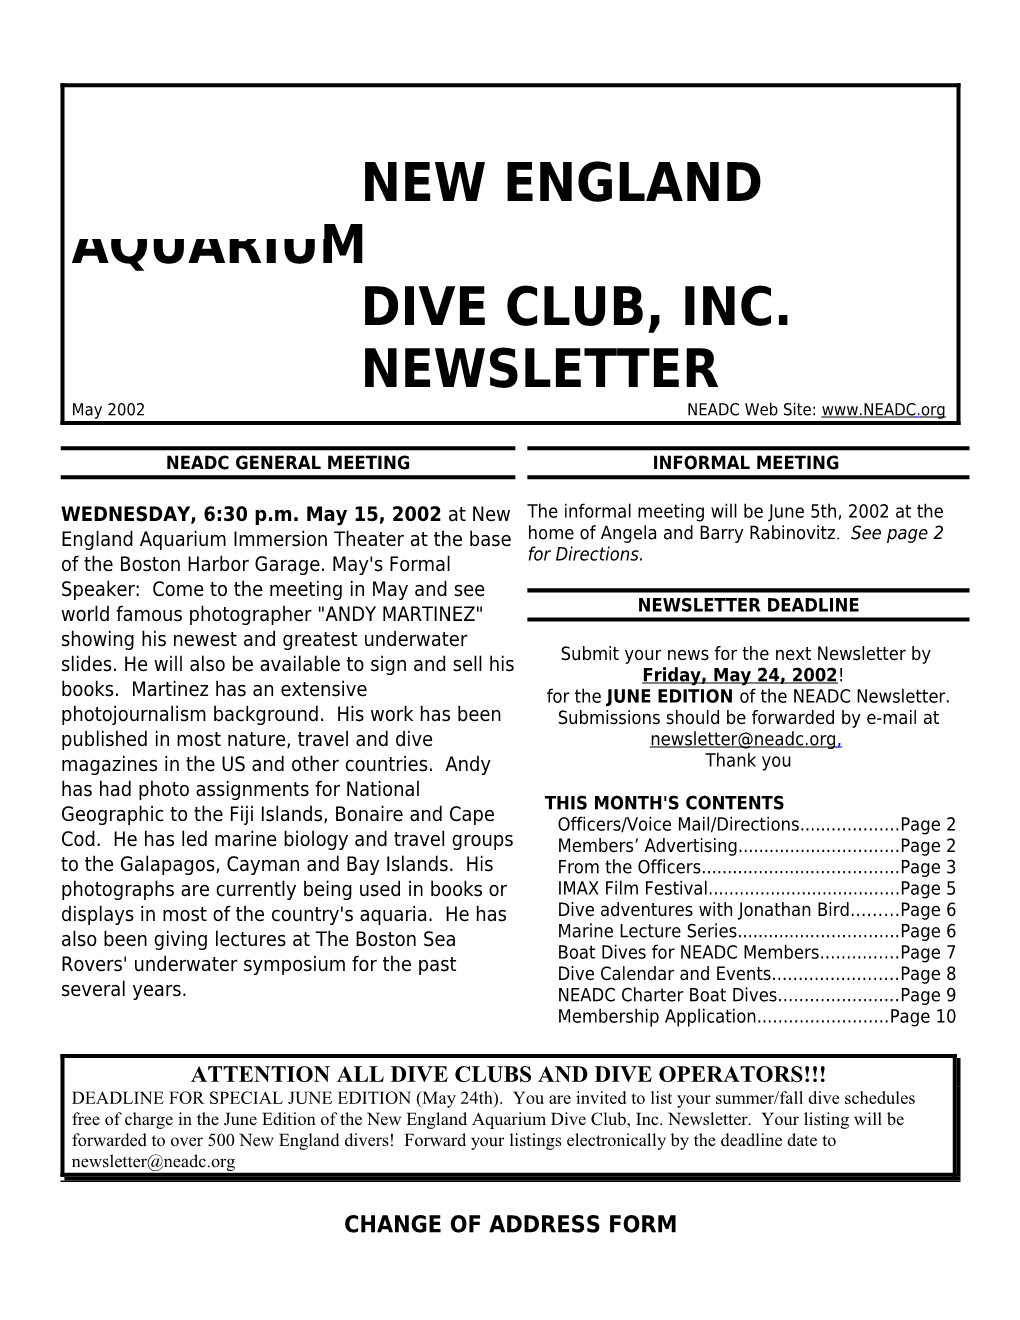 Attention All Dive Clubs and Dive Operators